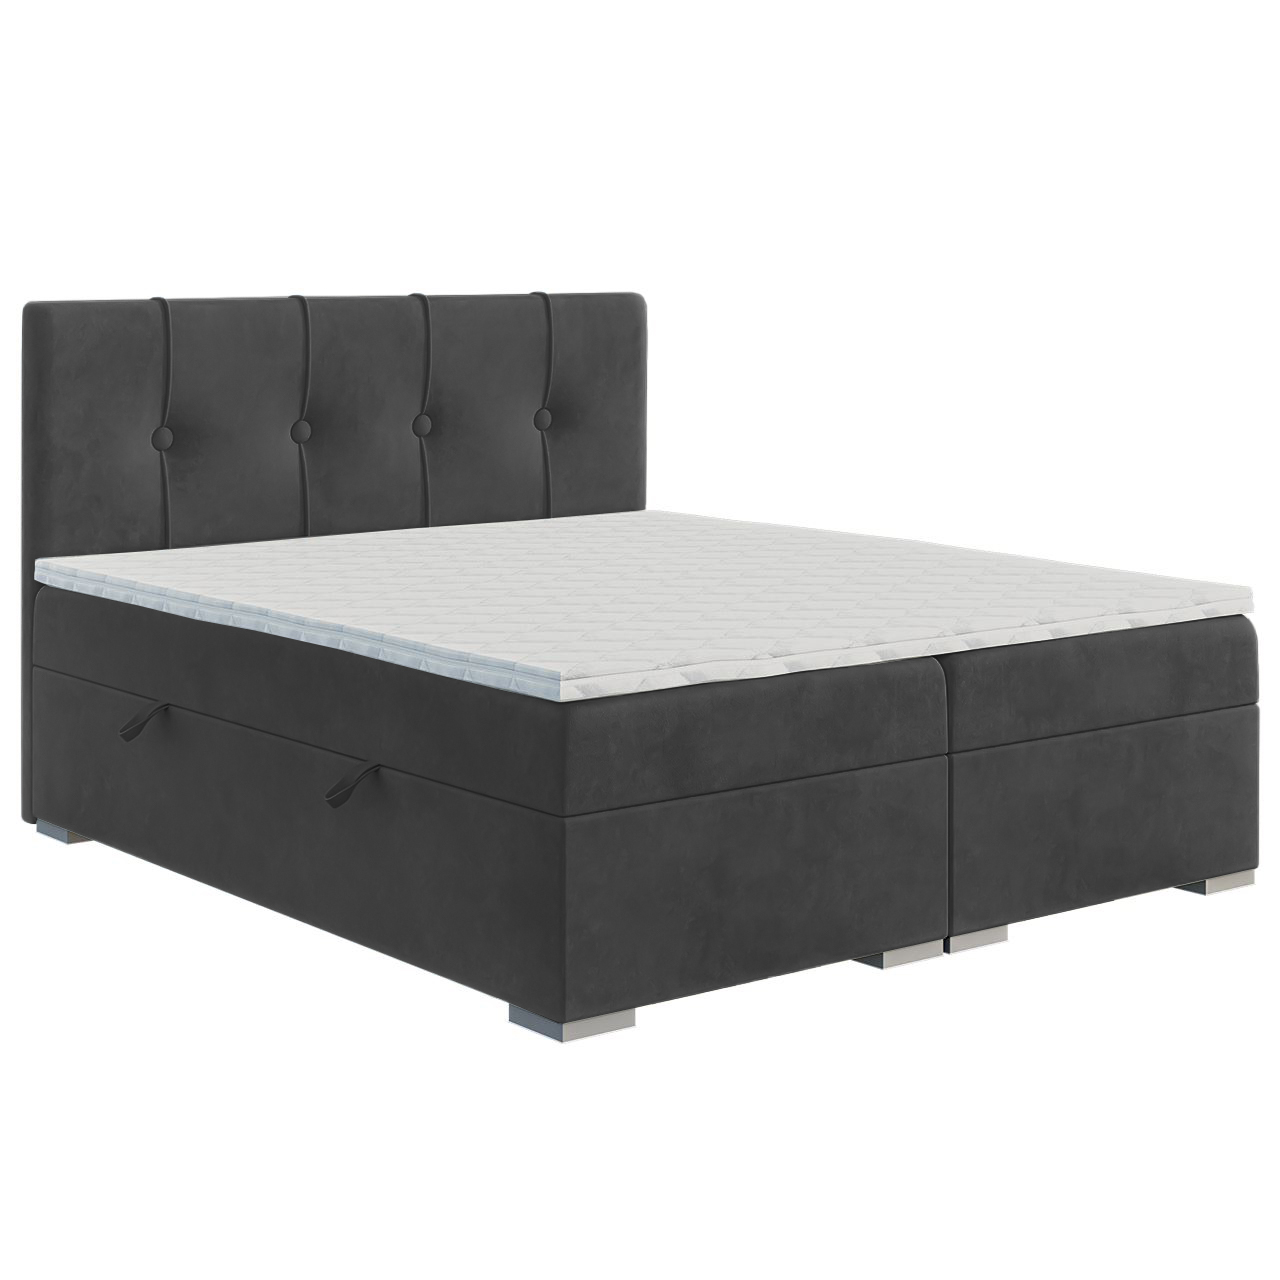 Upholstered bed RULEZ 140x200 riviera 97